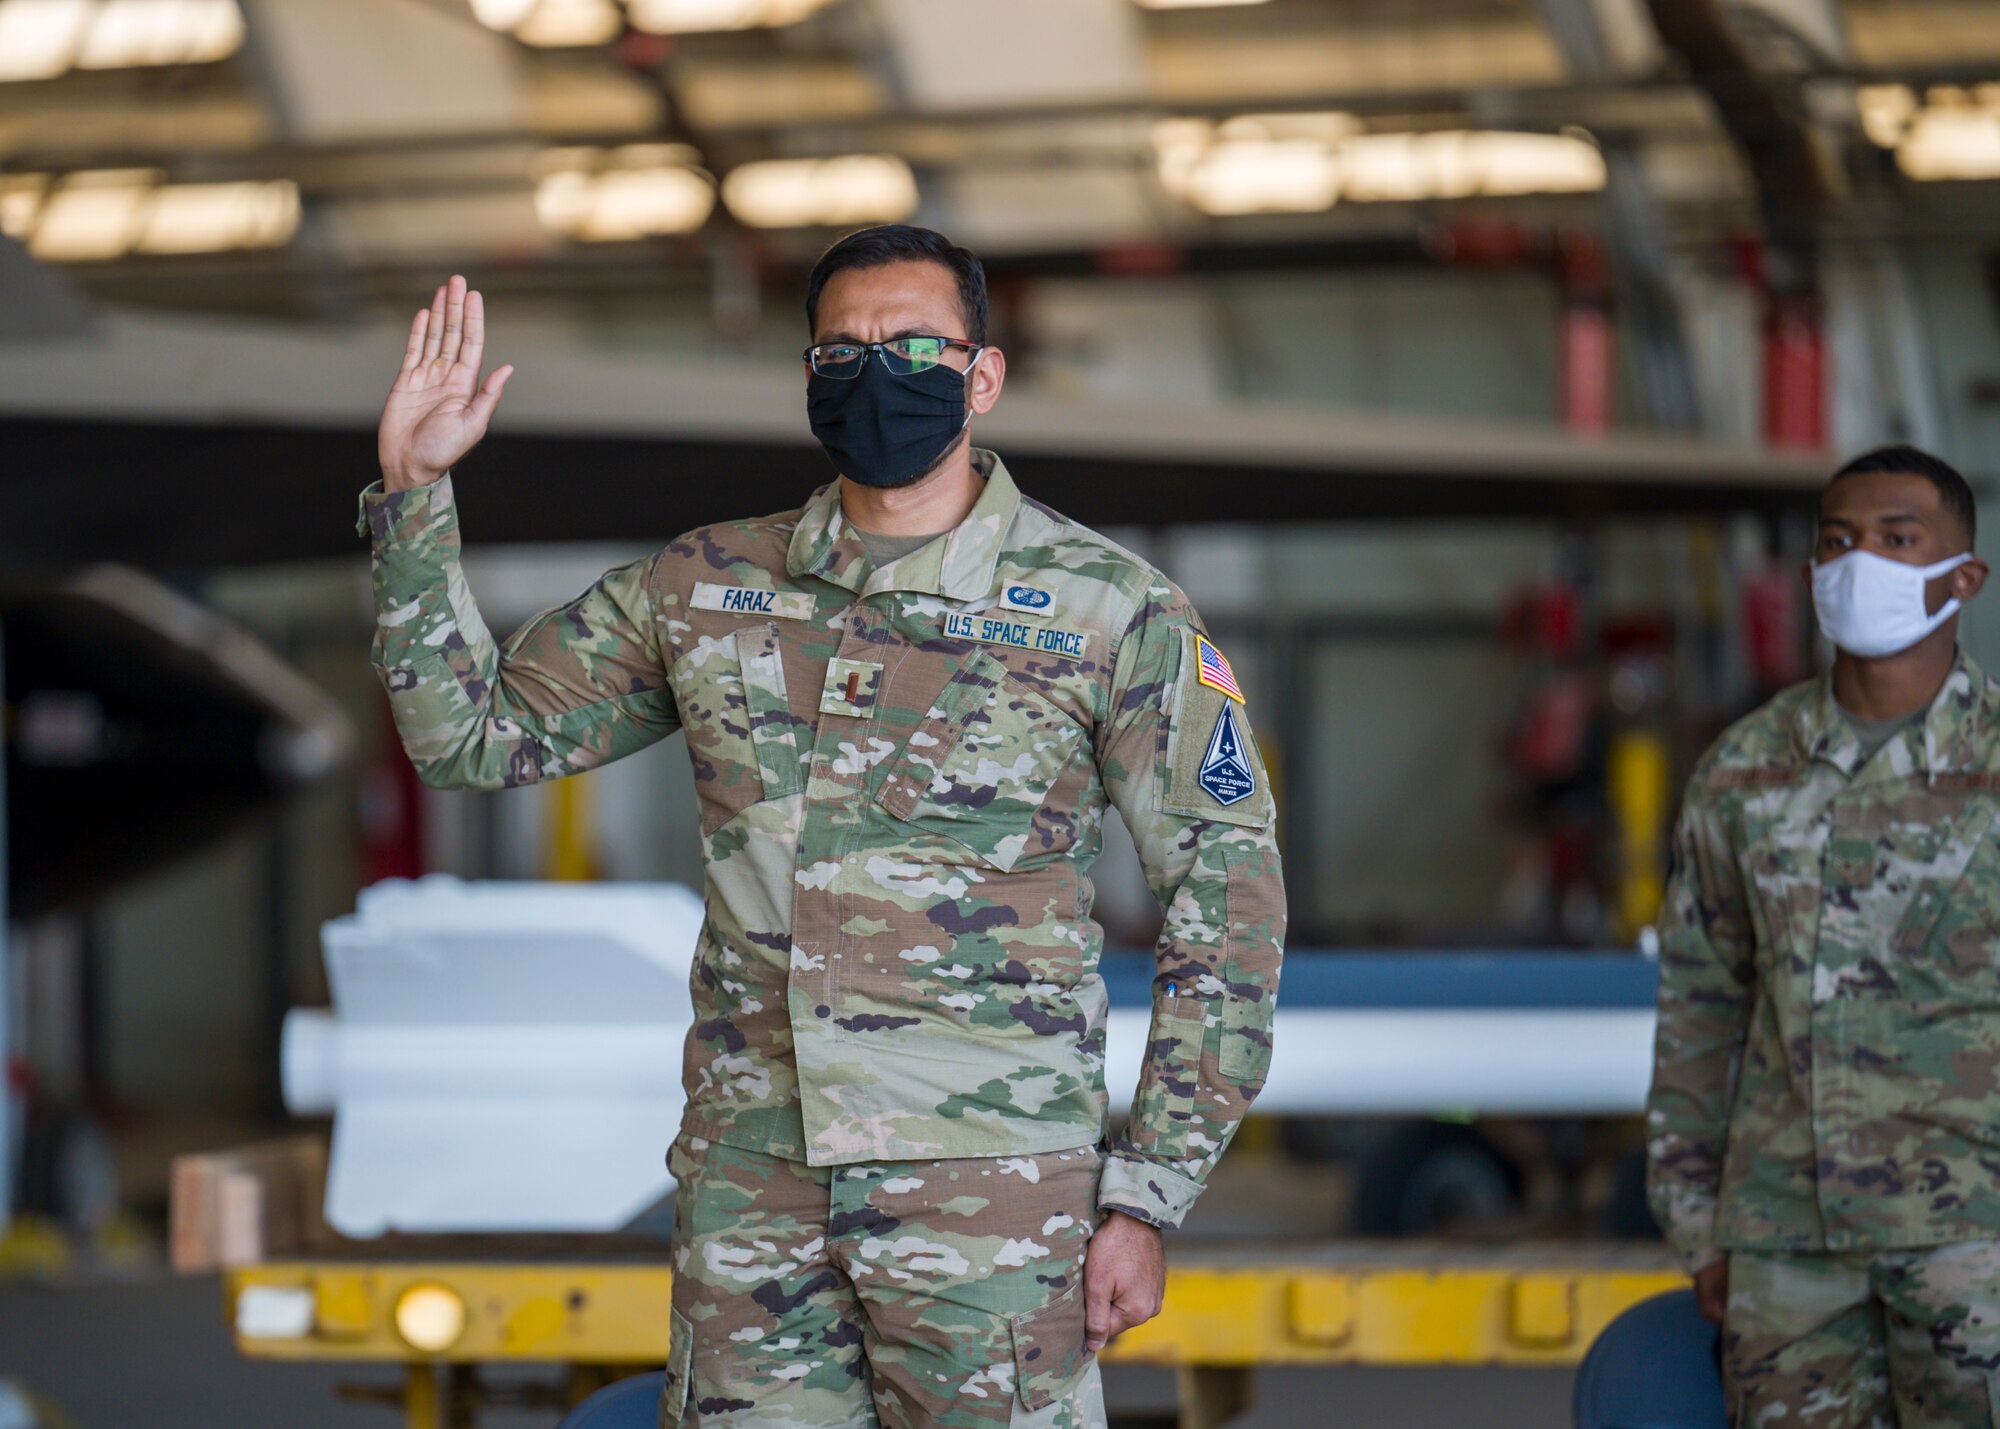 2nd Lt. Qazi Faraz, 773rd Test Squadron, originally of Houston, Texas, recites the oath of office during a Space Force Transfer Ceremony at Edwards Air Force Base, California, Feb. 11. (Air Force photo by Giancarlo Casem)